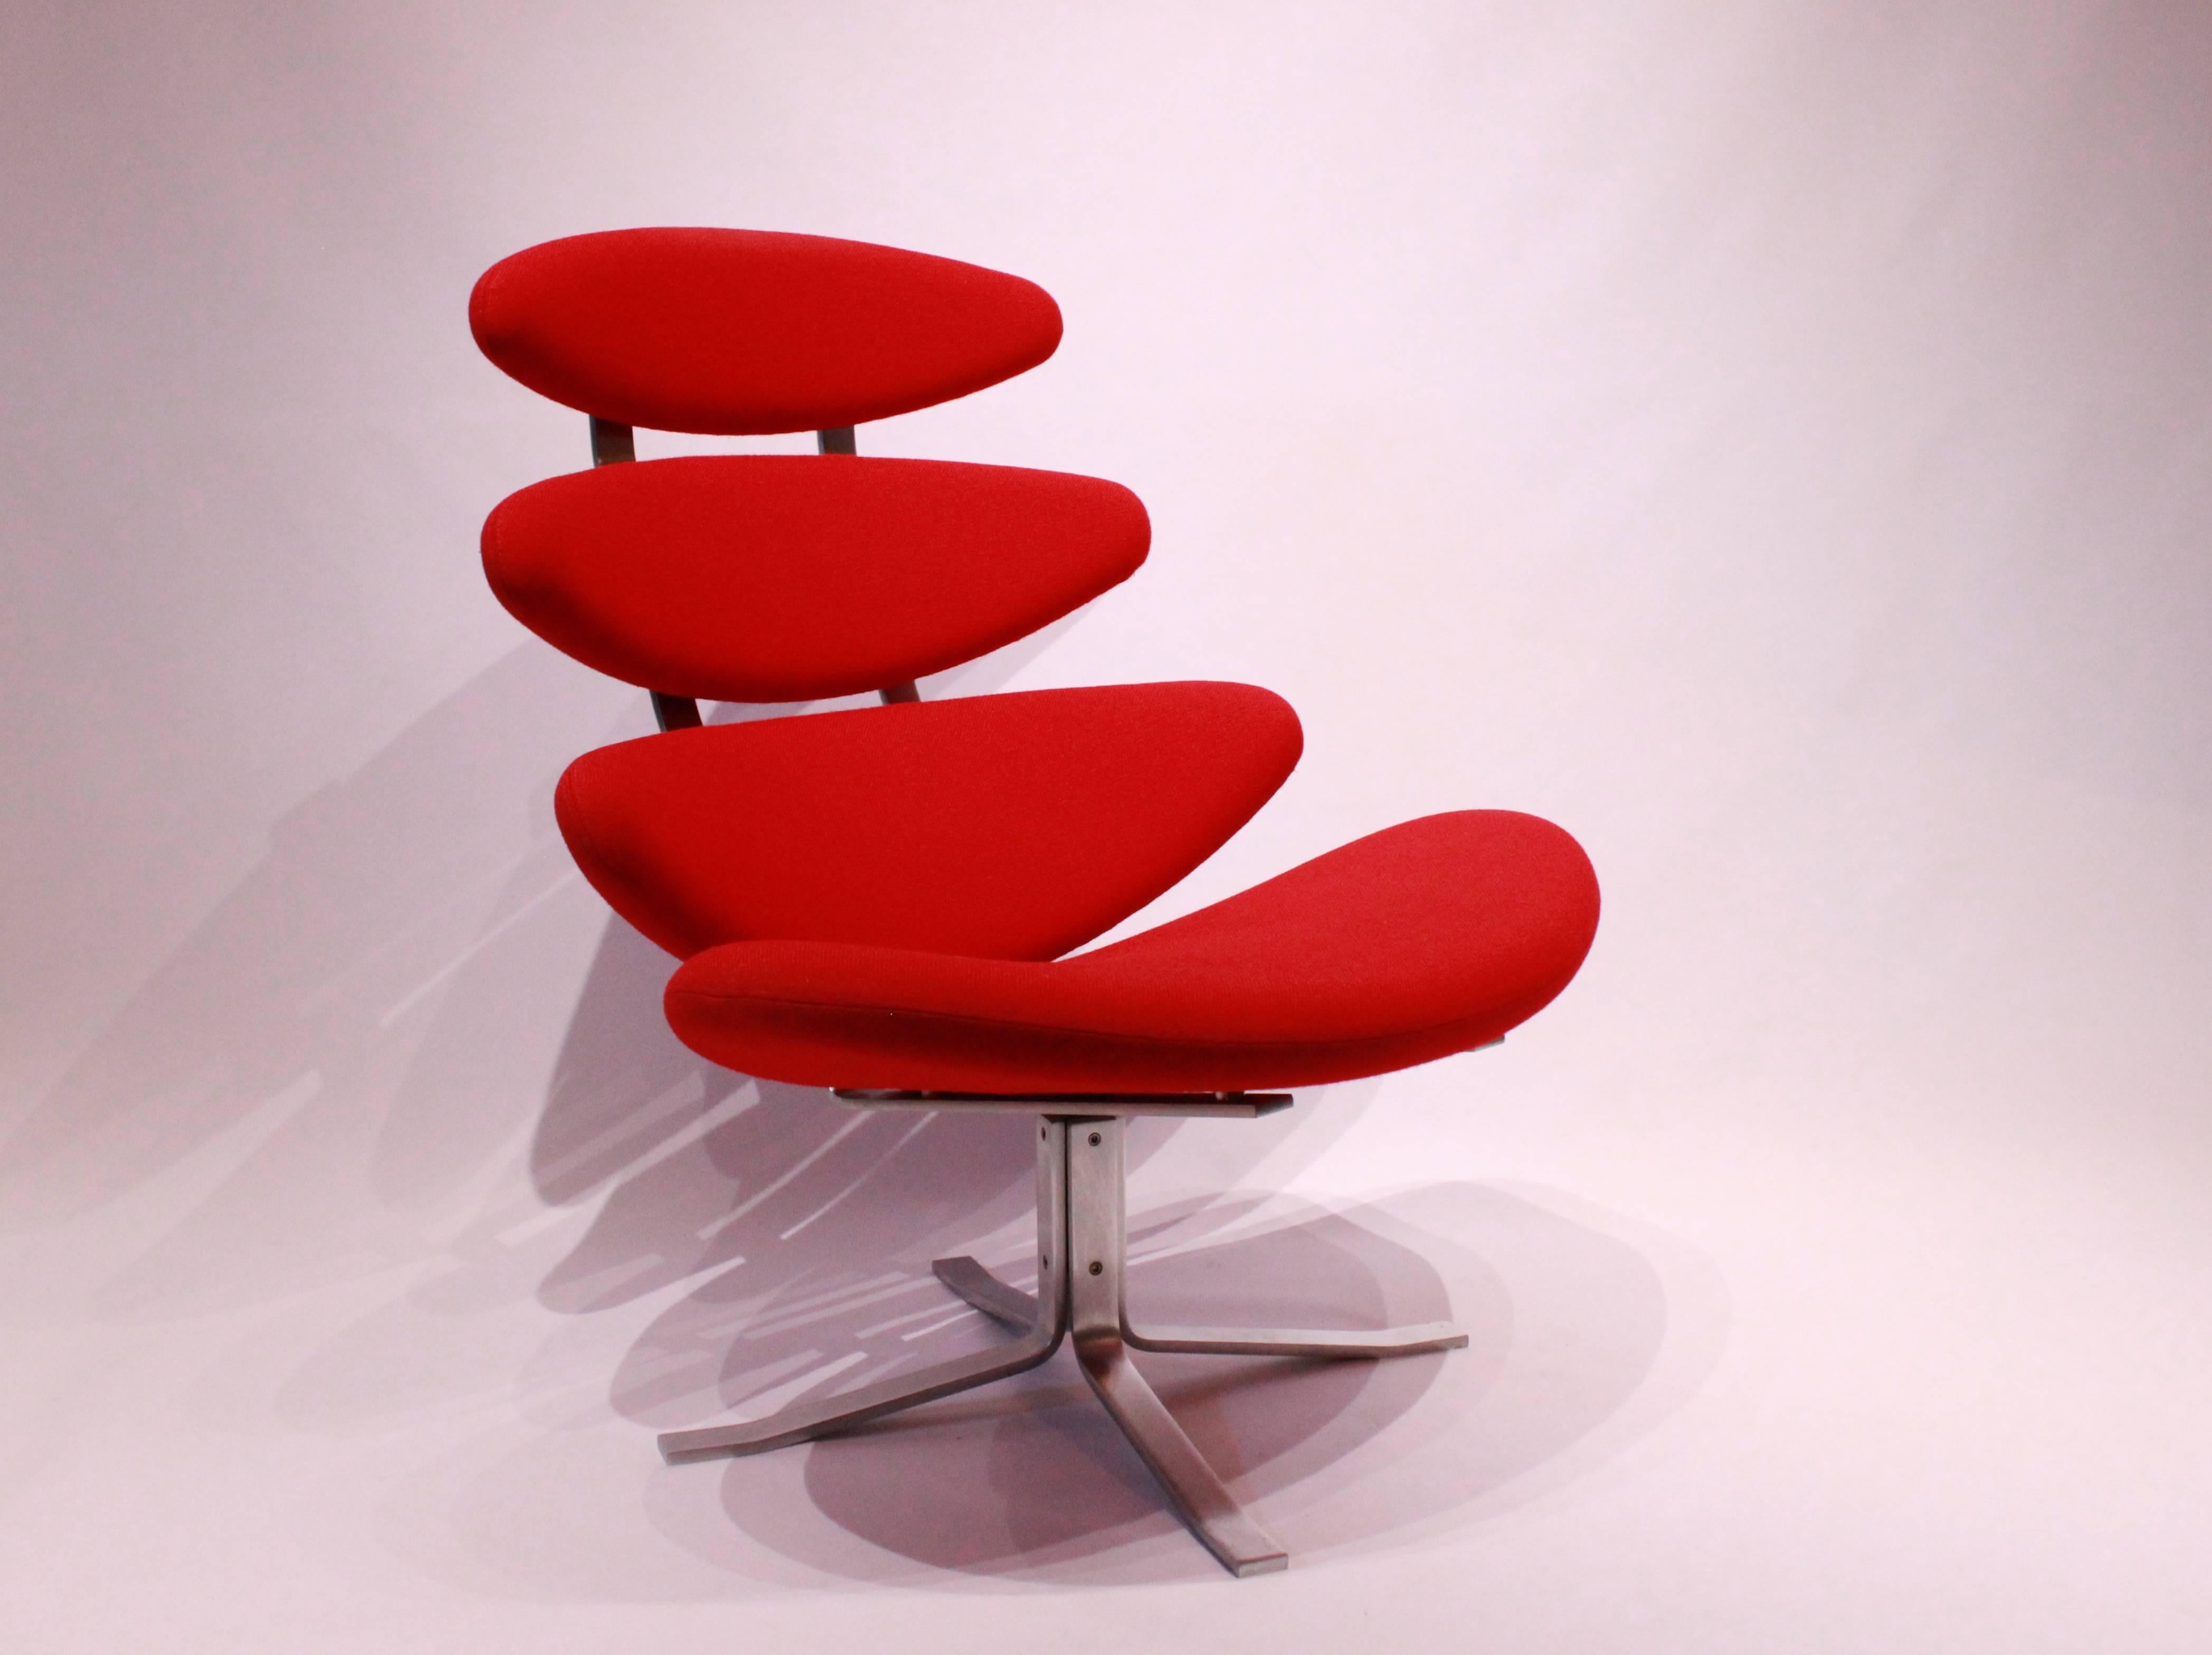 Corona, model EJ 5, designed by Poul M. Volther in 1964 and manufactured by Erik Jørgensen. The chair is upholstered in red wool fabric.